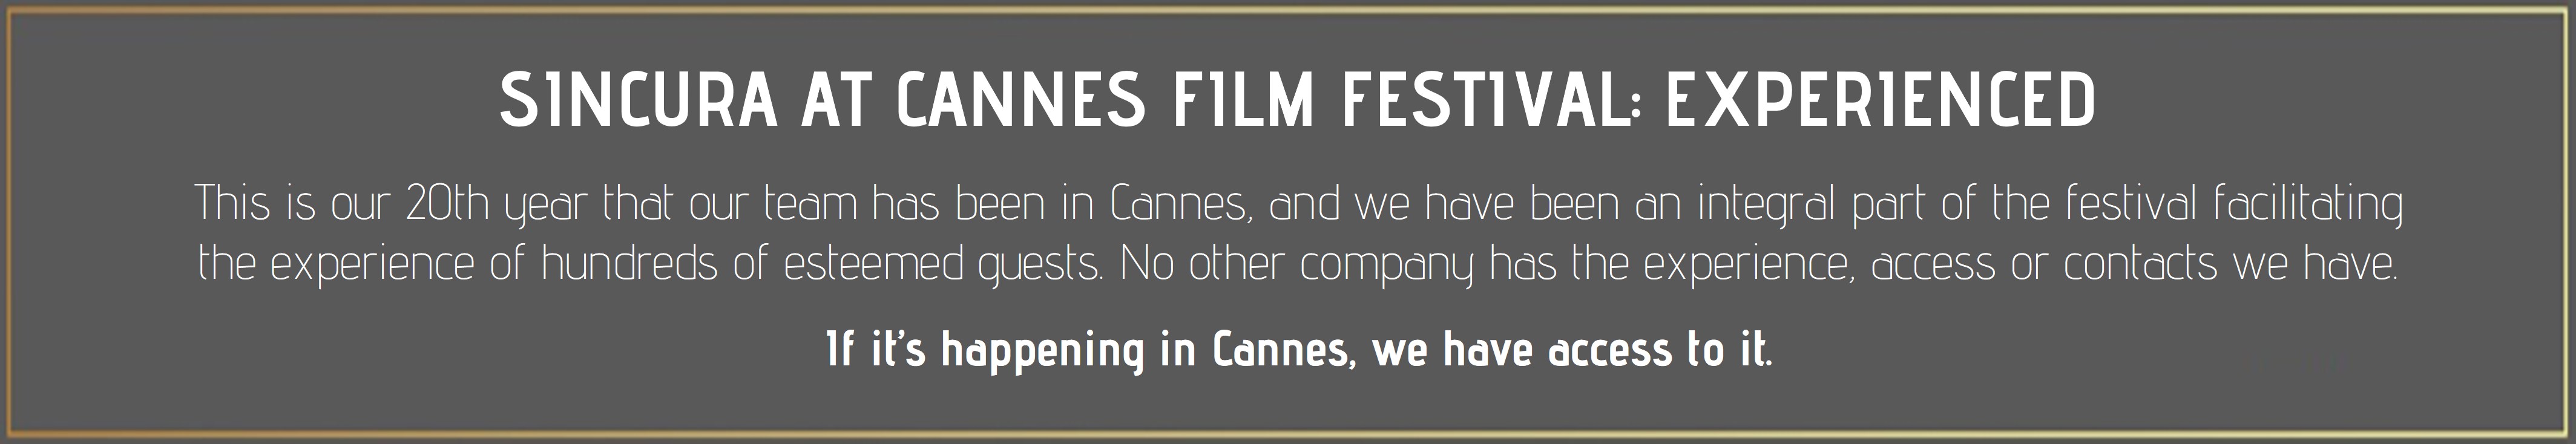 vip tickets and corporate hospitality at cannes film festival